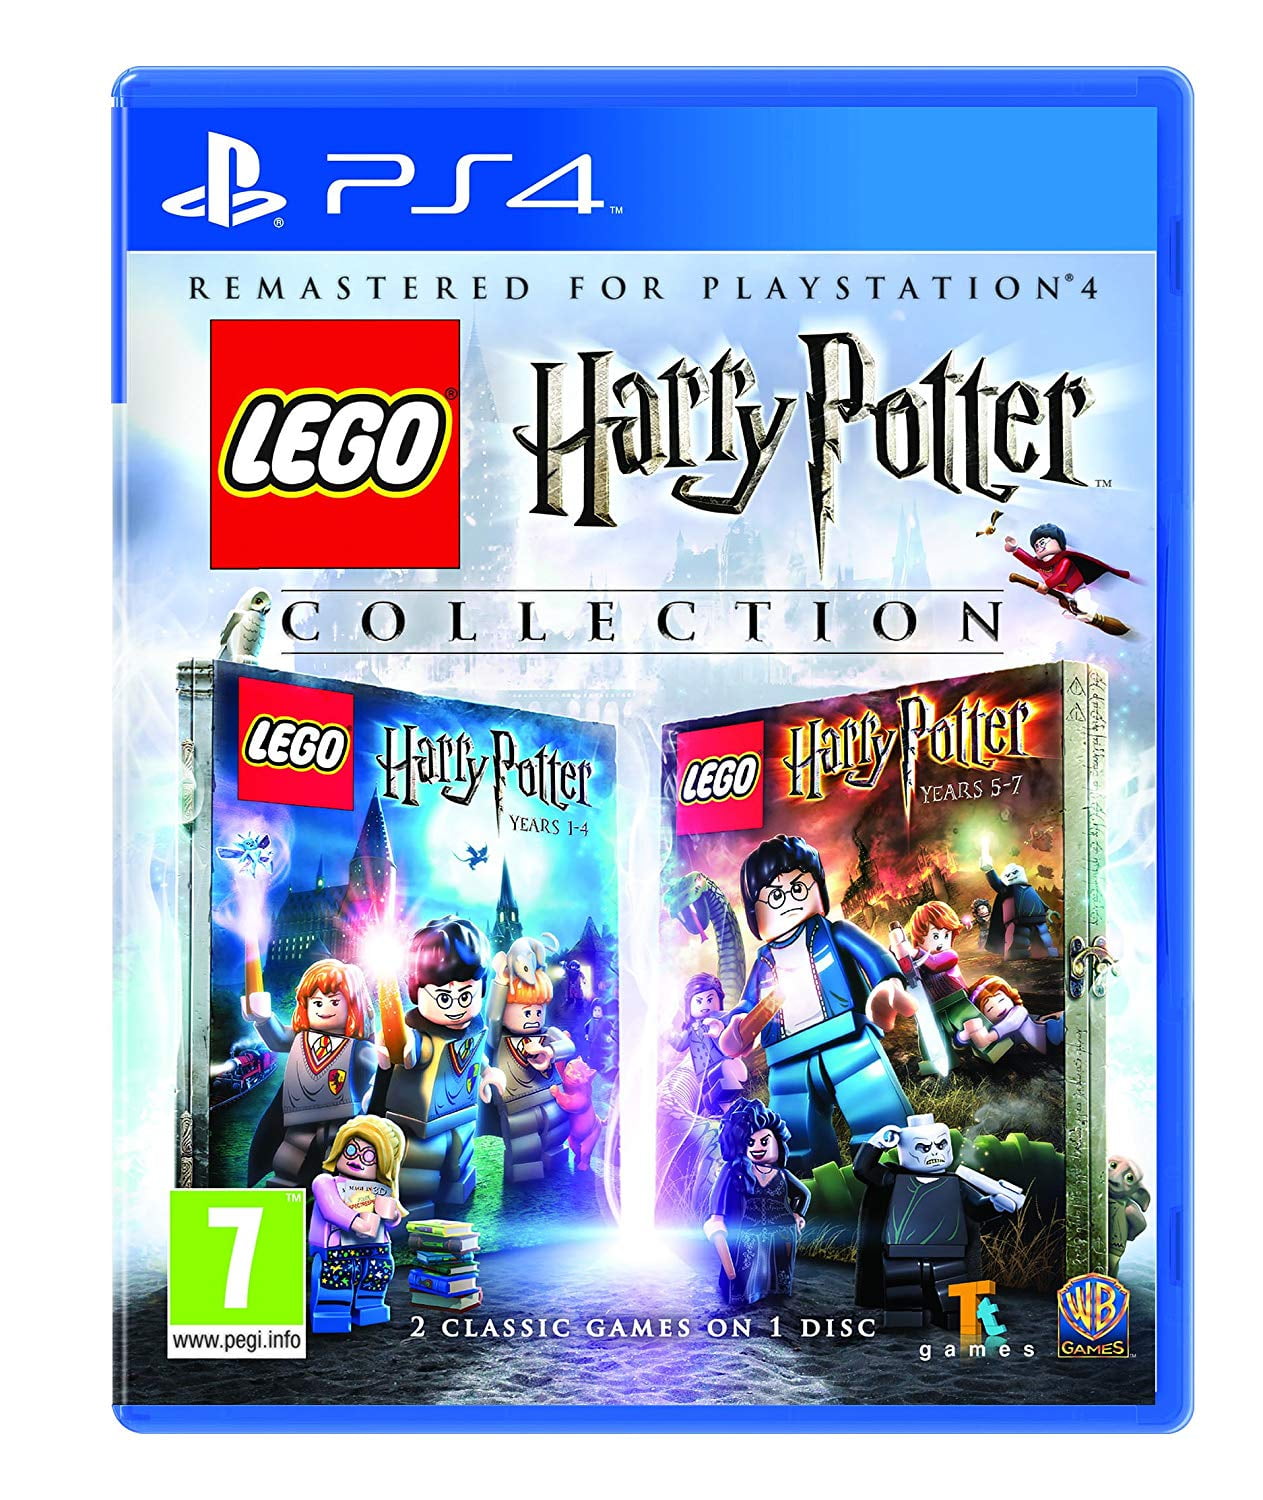 lego-harry-potter-collection-ps4-playstation-4-years-1-4-and-years-5-7-walmart